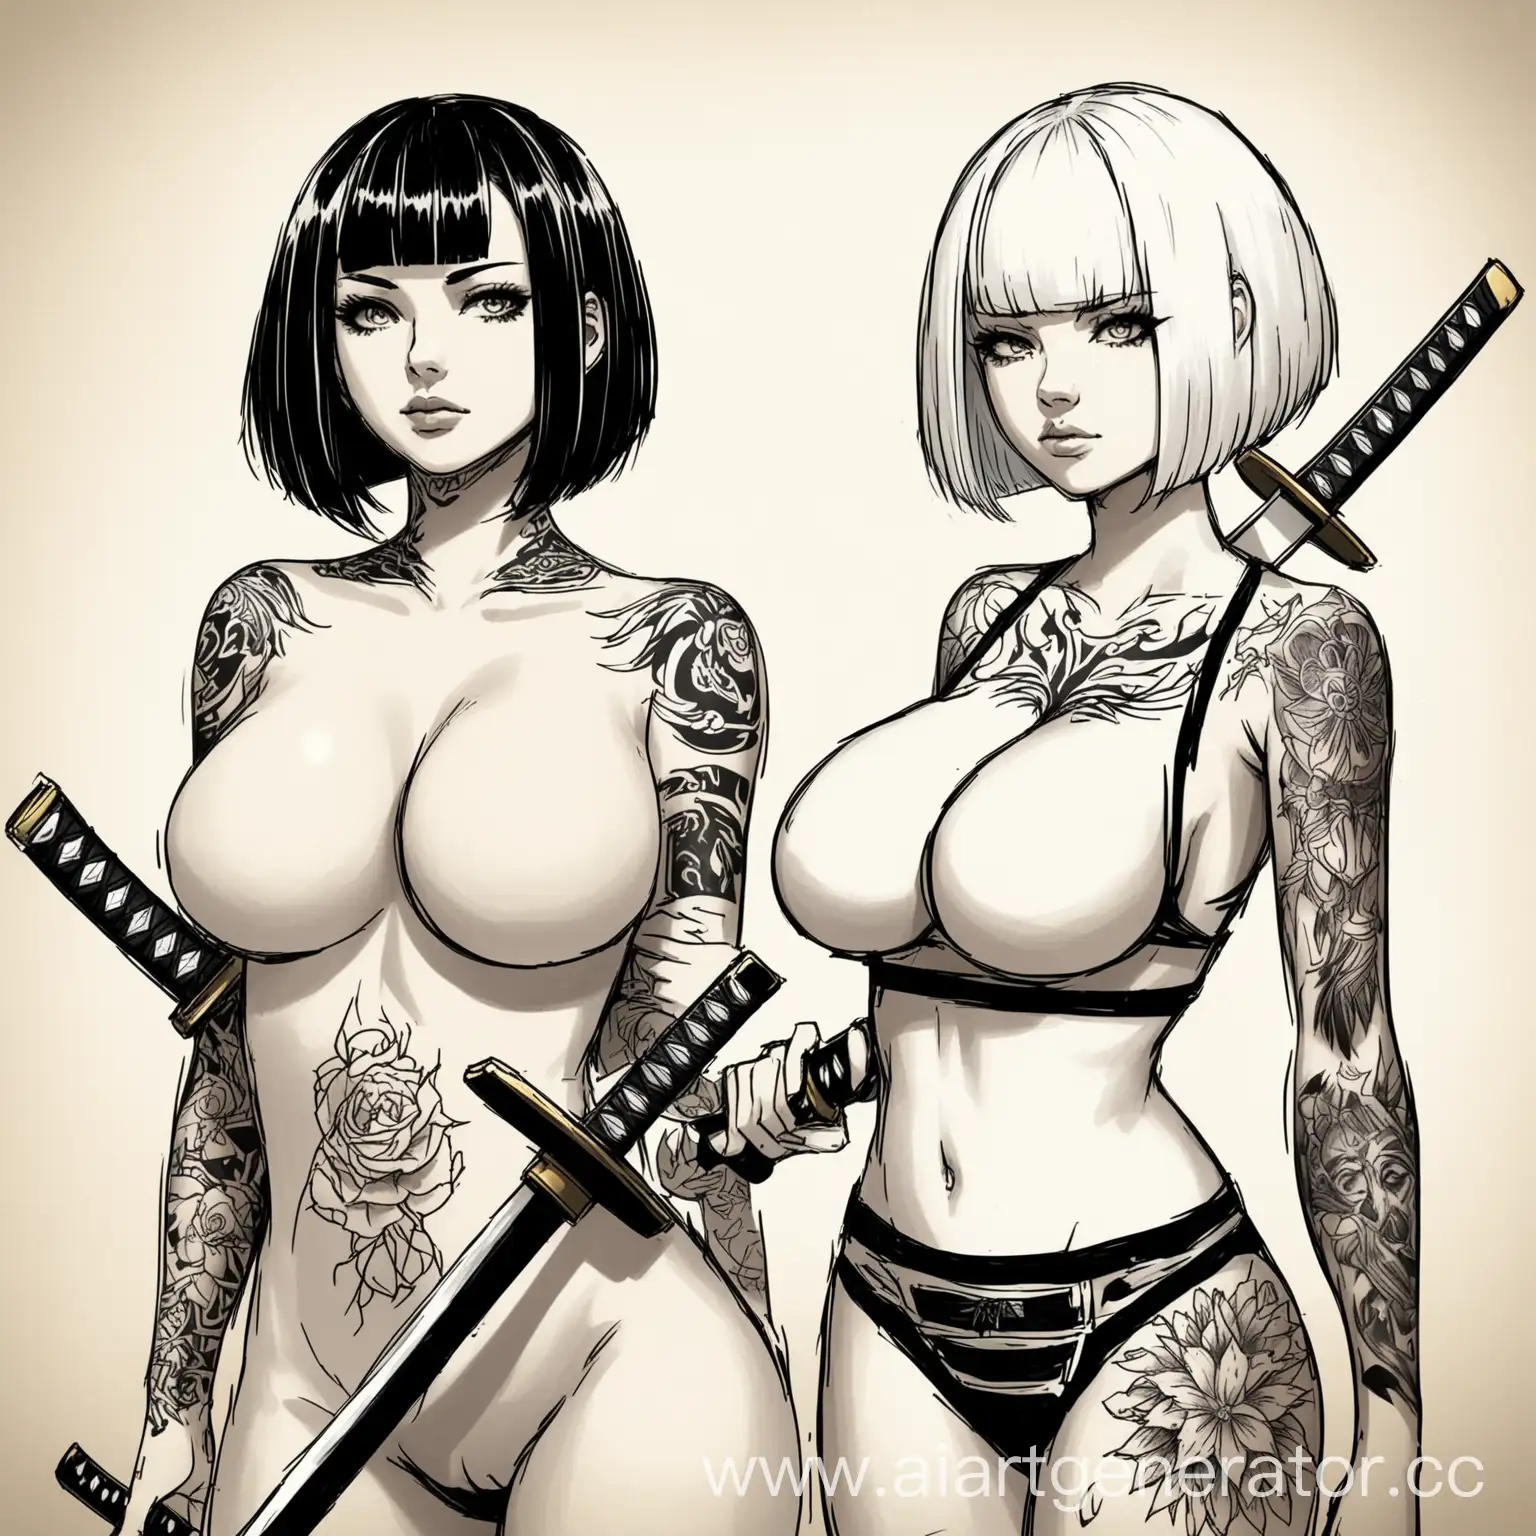 Tattoo-Sketch-of-SwordWielding-BobHaired-Woman-with-Unique-Companion